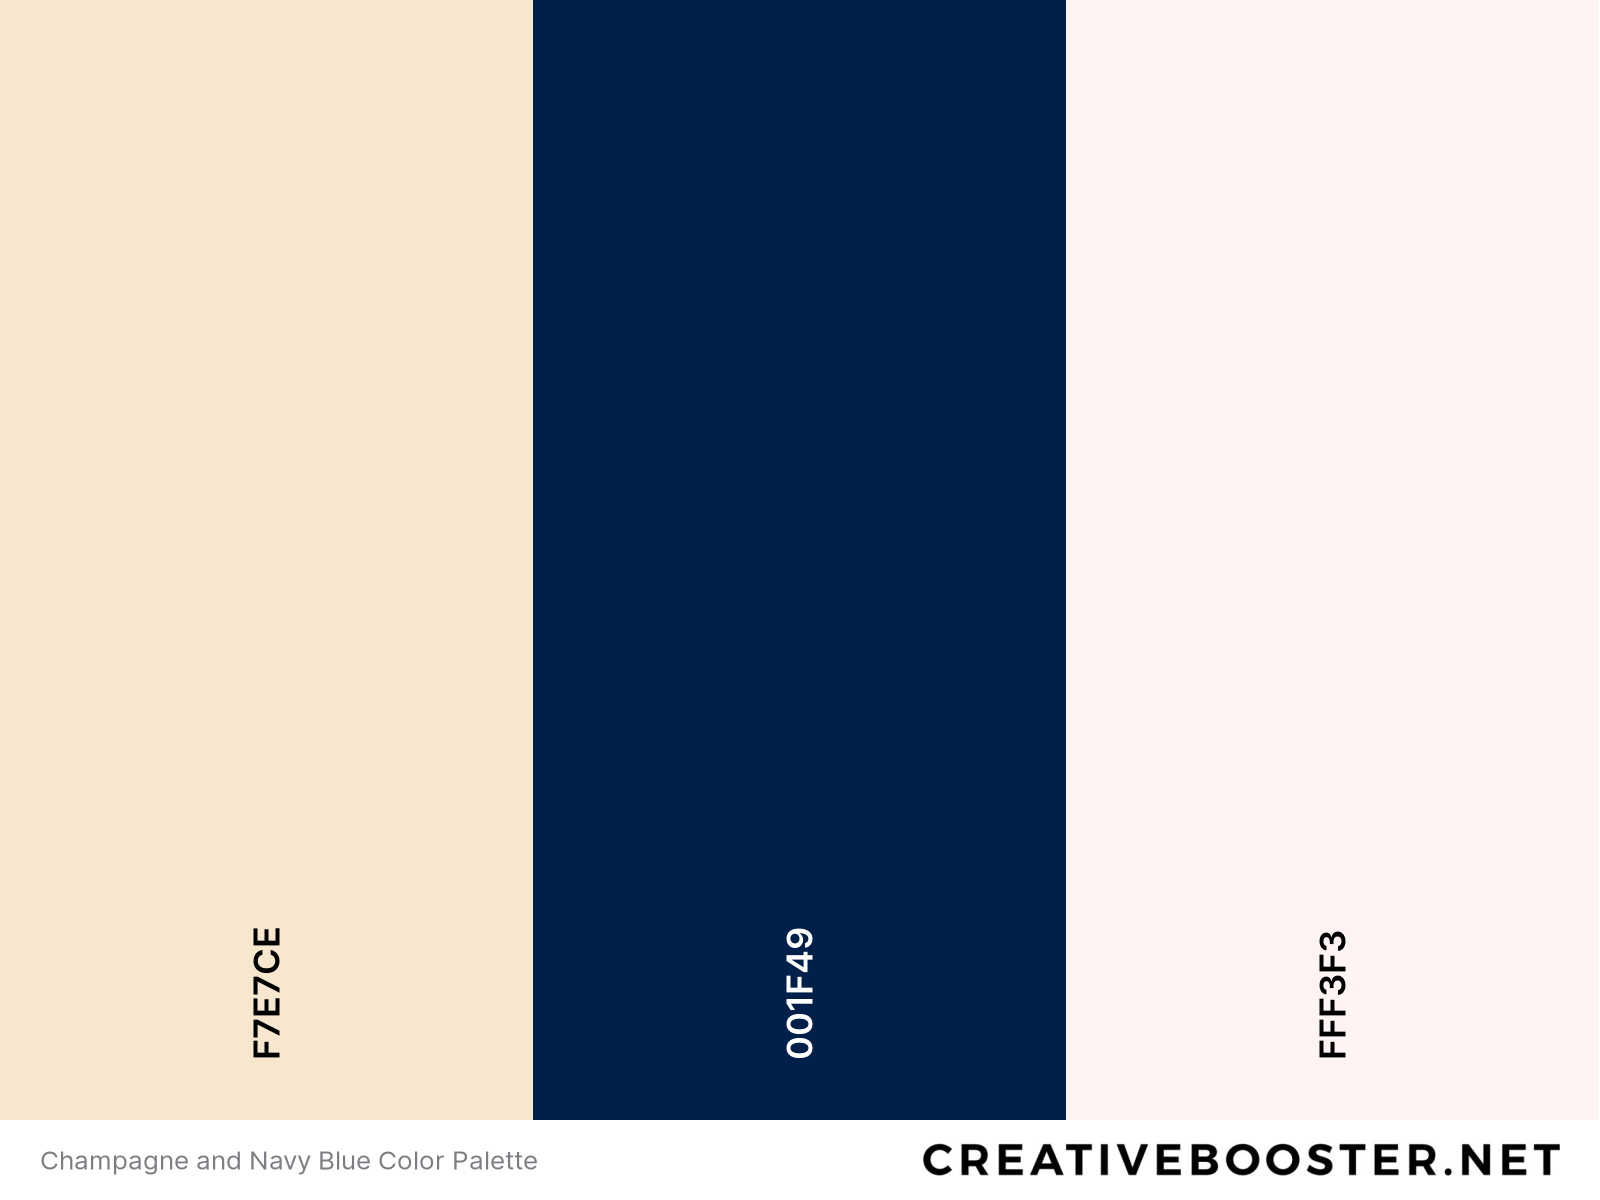 Champagne and Navy Blue Color Palette